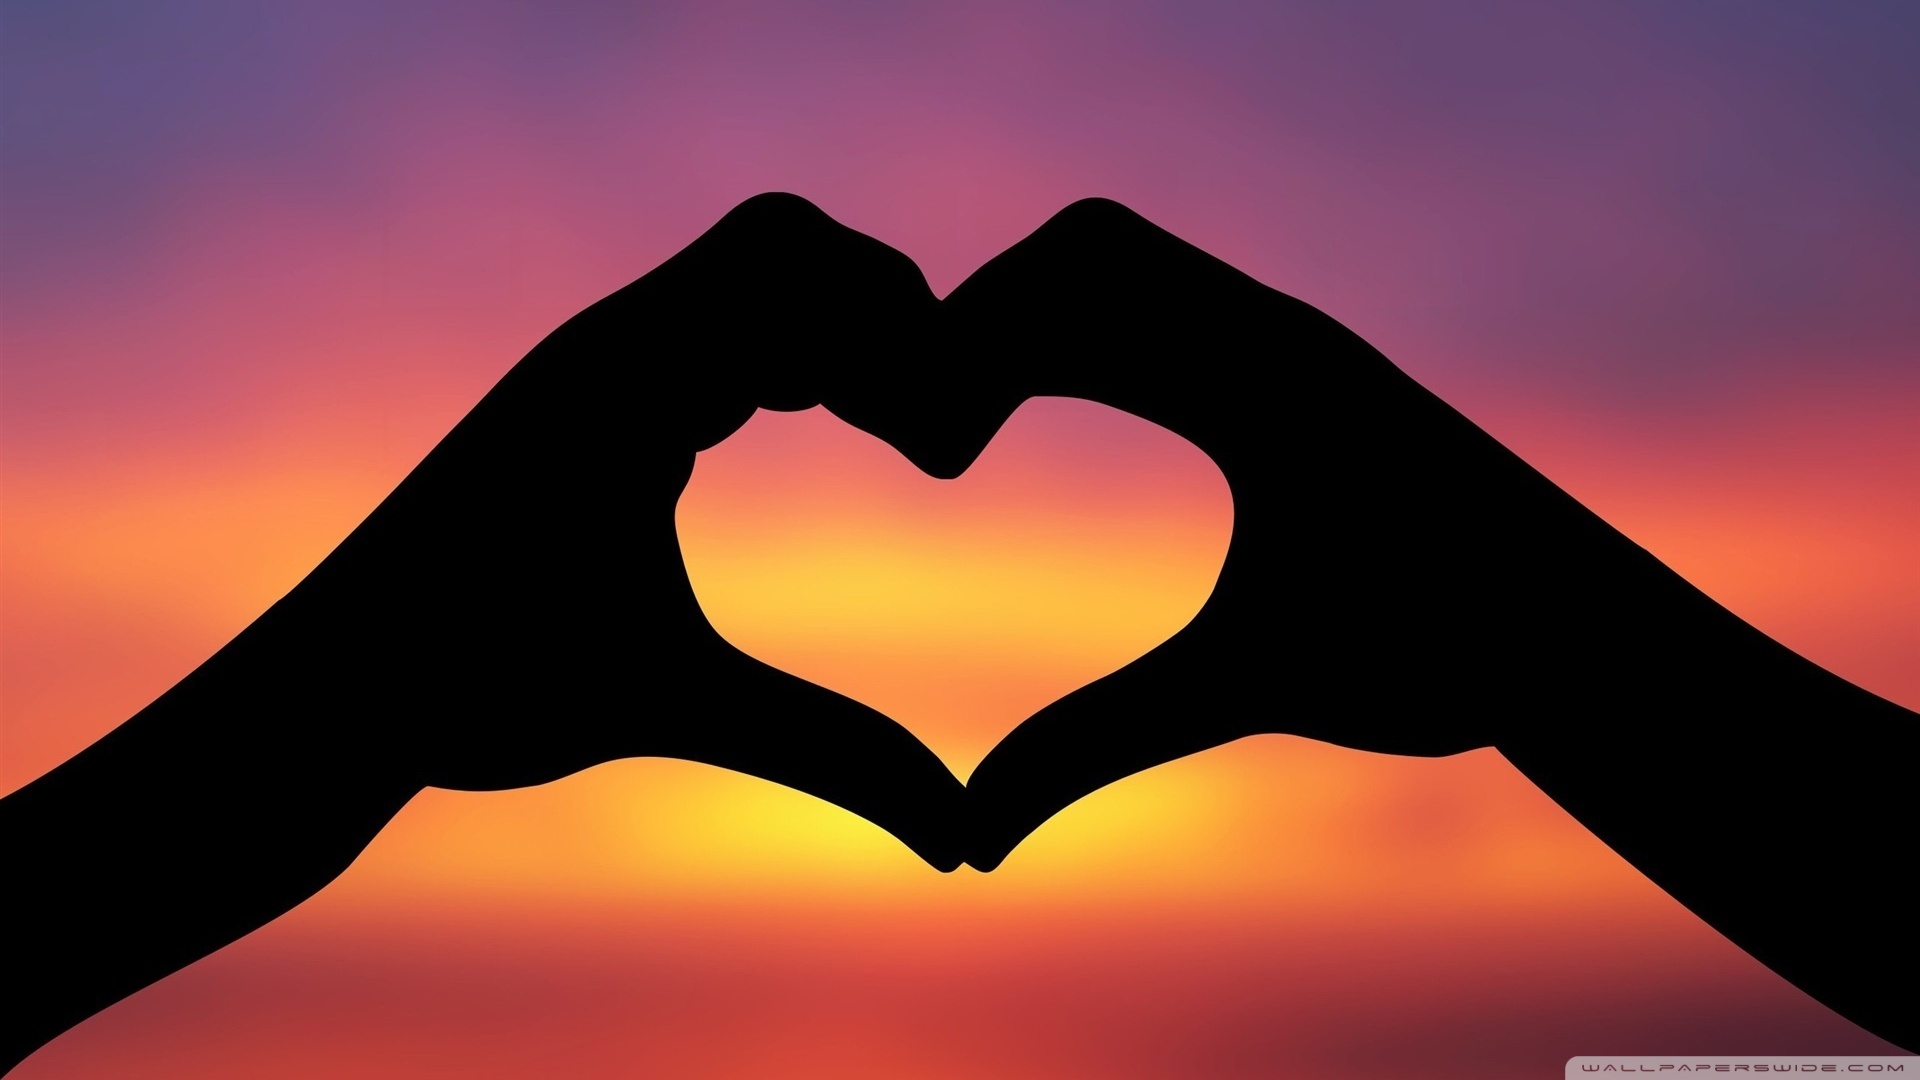 Image - Hands-making-a-heart-in-the-sunset 00450550.jpg | House of ...